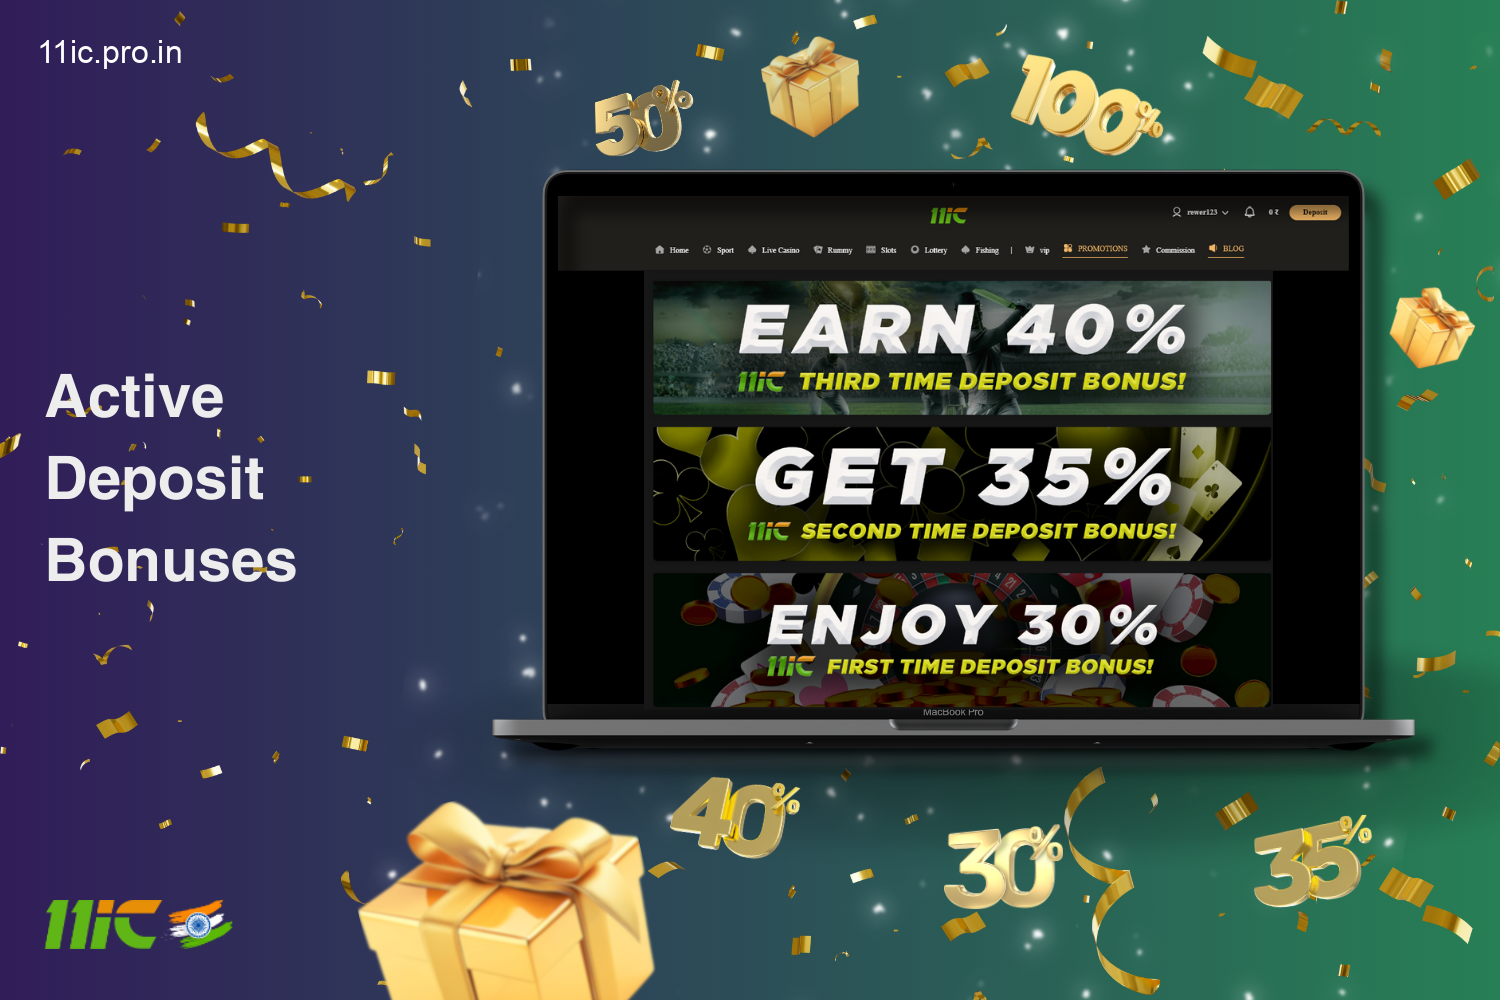 Active deposit bonuses on 11ic for players from India are rewards for depositing funds